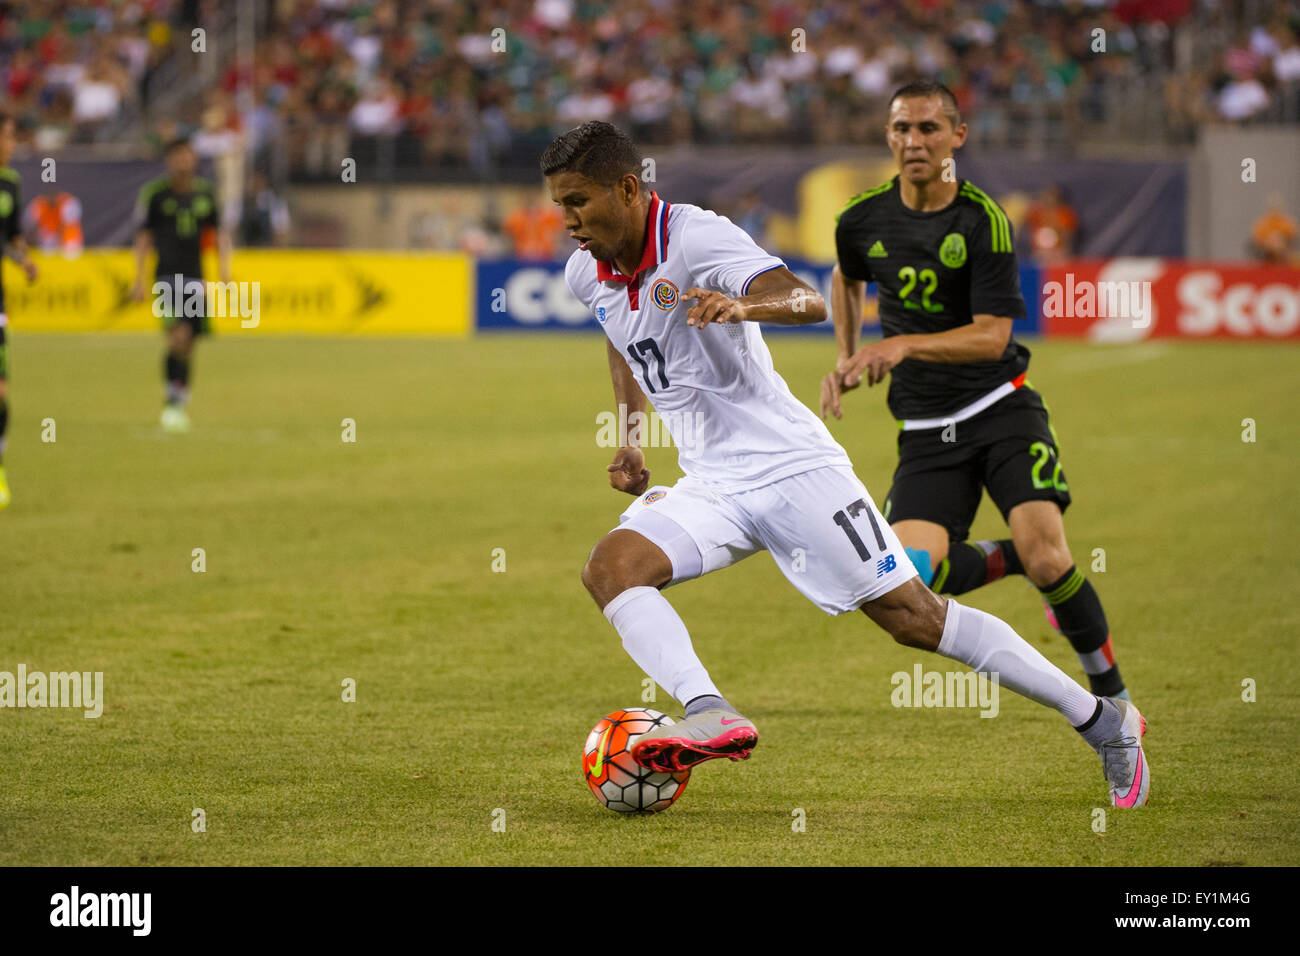 Met Life Stadium, East Rutherford, NJ, USA. 19th July, 2015. Costa Rica midfielder Johan Venegas (17) makes a move on Mexico defender Paul Aguilar (22) during the quarter-finals of The CONCACAF Gold Cup match between Mexico and Costa Rica at Met Life Stadium, East Rutherford, NJ. Mexico defeated Costa Rica 1-0 in the final minute of extra time. Mandatory Credit: Kostas Lymperopoulos/CSM/Alamy Live News Stock Photo